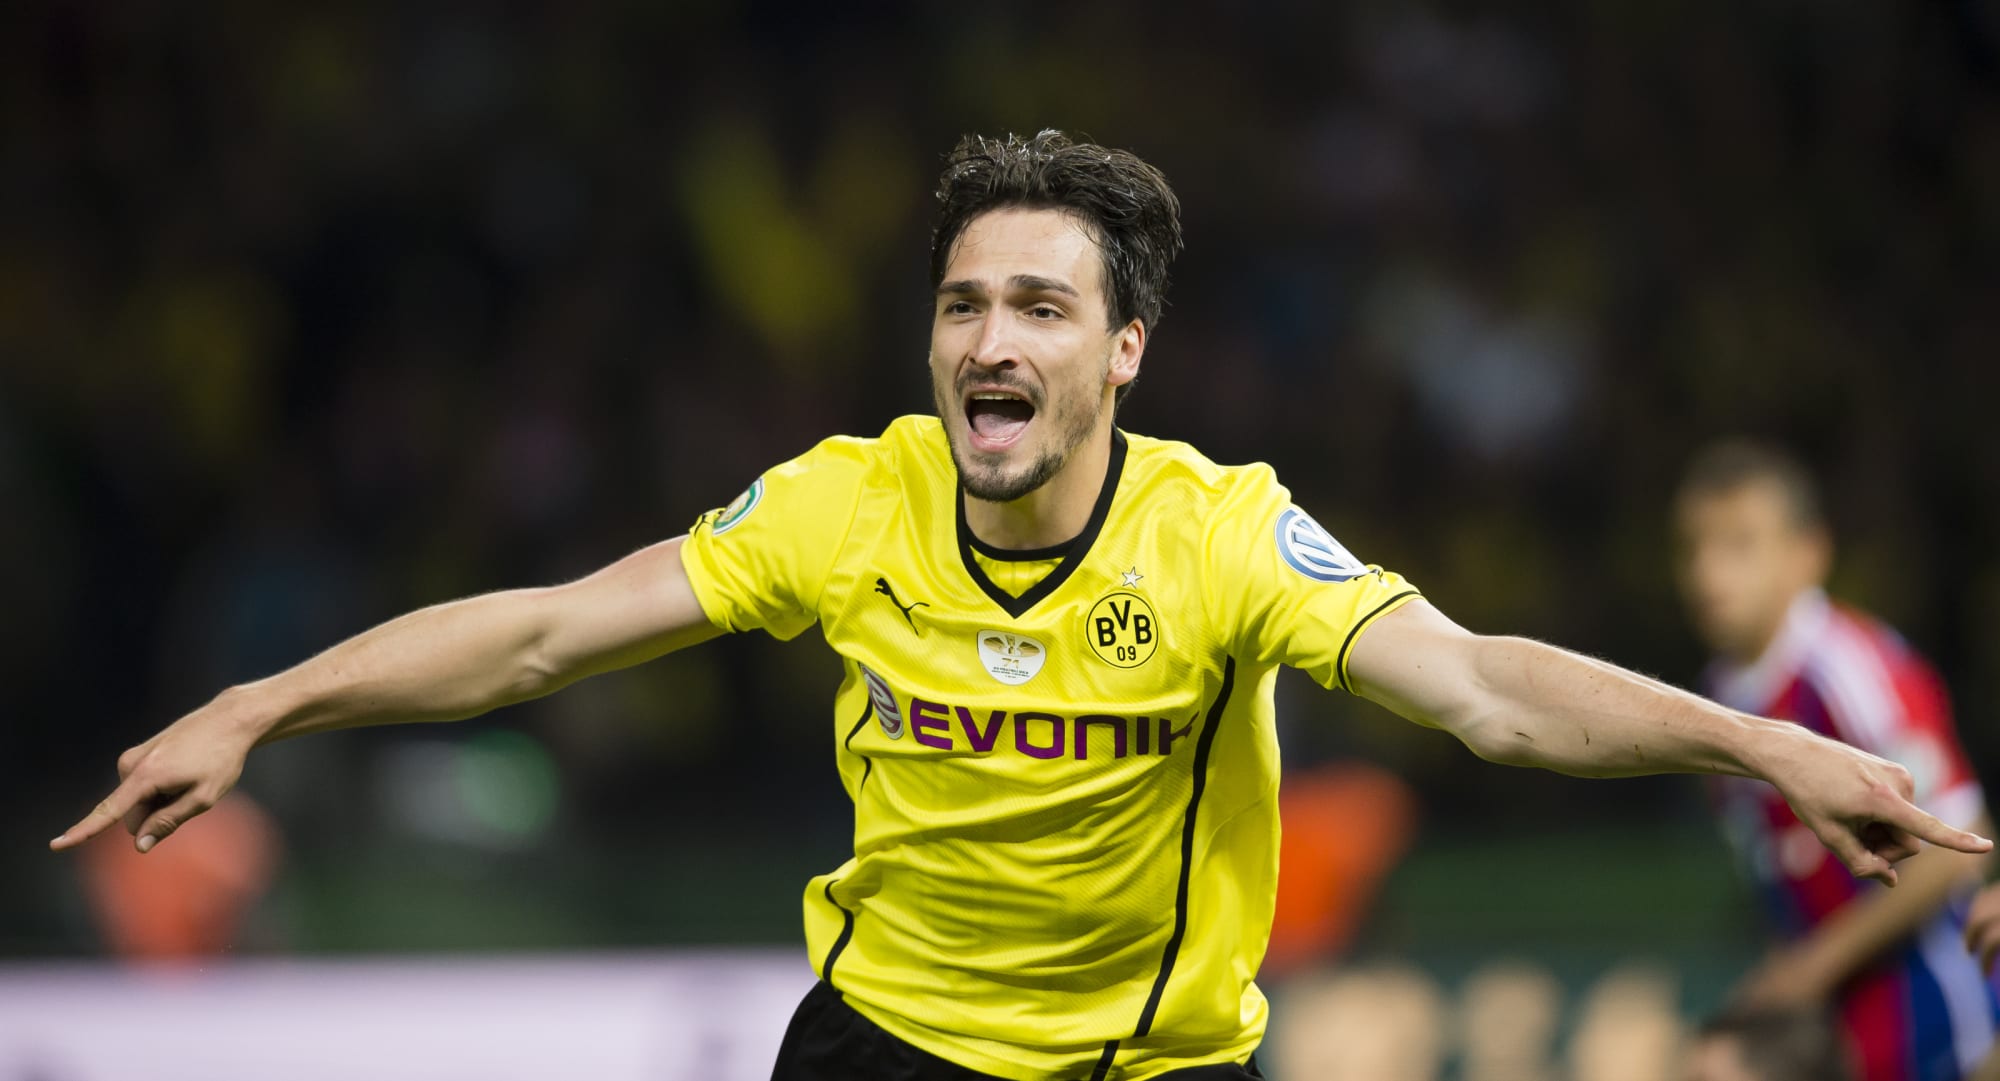 Winners and losers from Mats Hummels' transfer to Borussia Dortmund